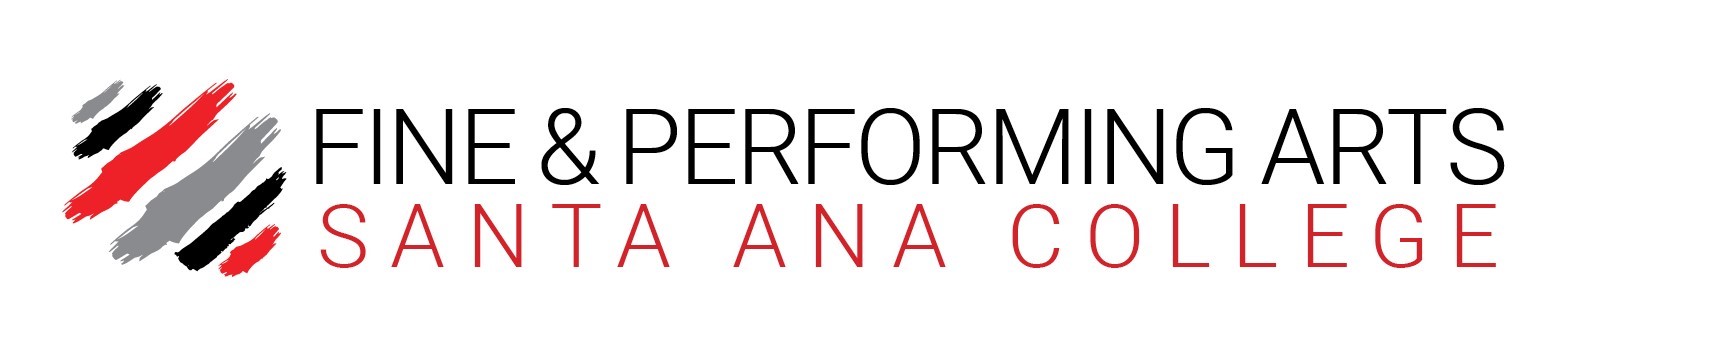 Fine and Performing Arts Banner